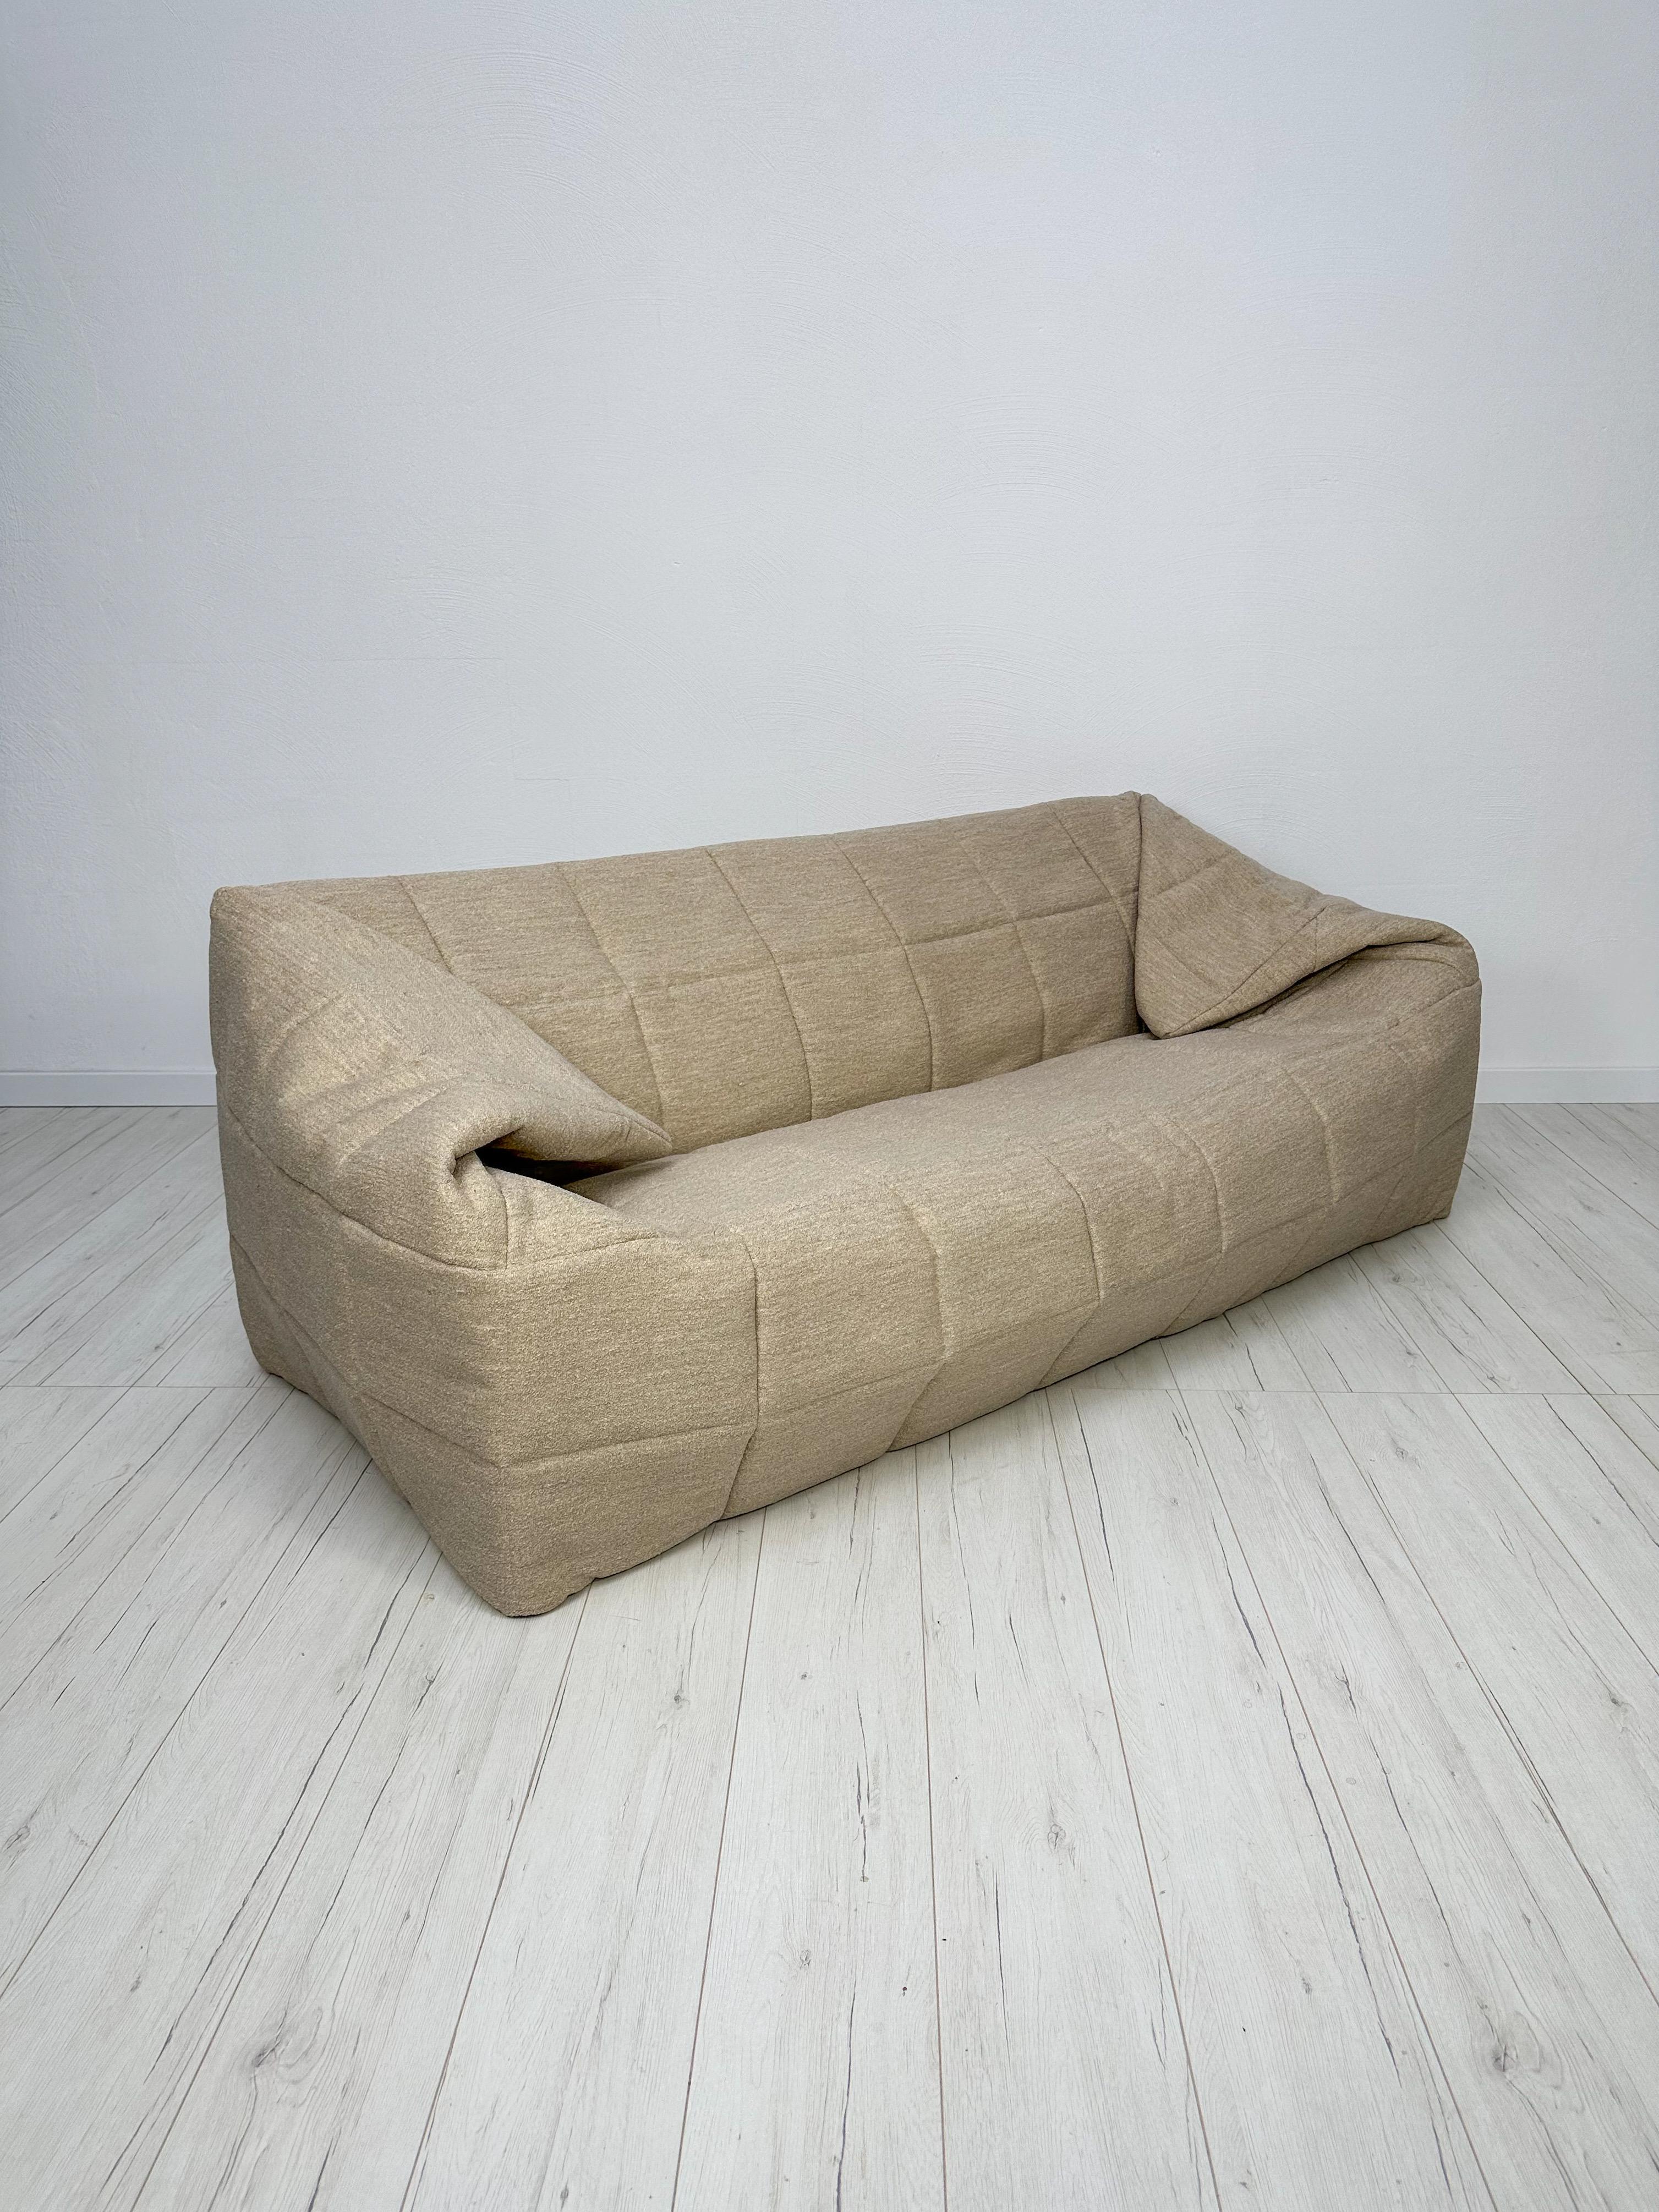 ORIGINAL 3-SEATER SOFA YUCCA BY MICHEL DUCAROY FOR CINNA, 1980s For Sale 2